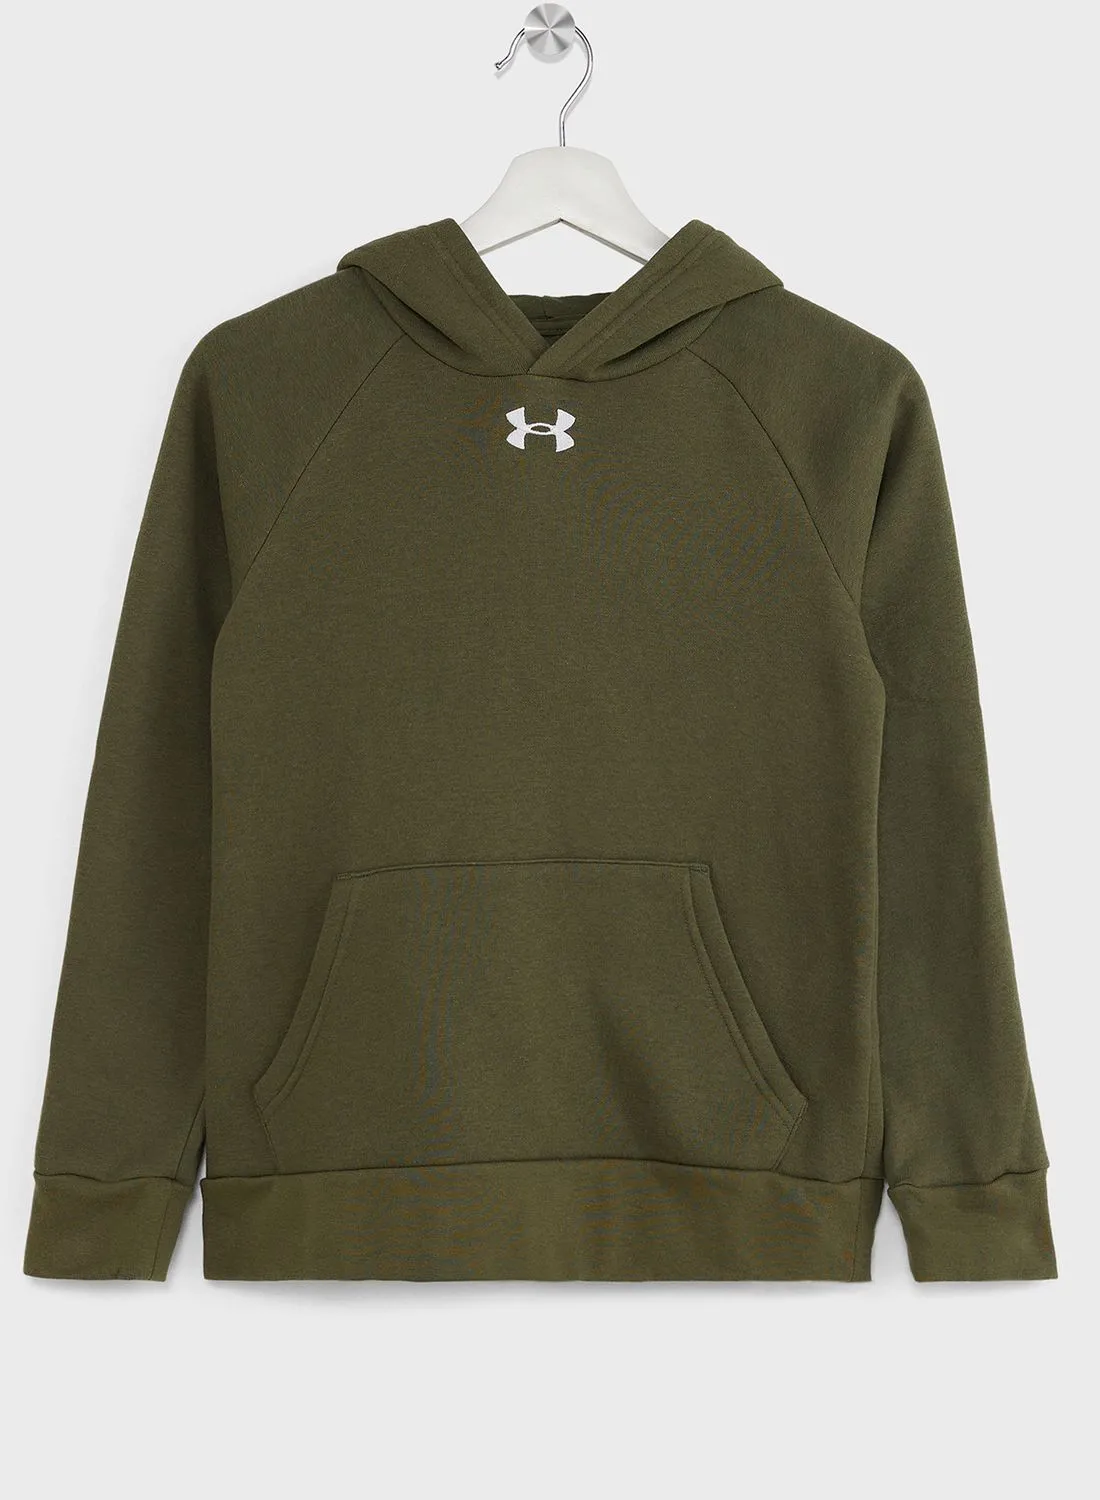 UNDER ARMOUR Youth Rival Fleece Hoodie